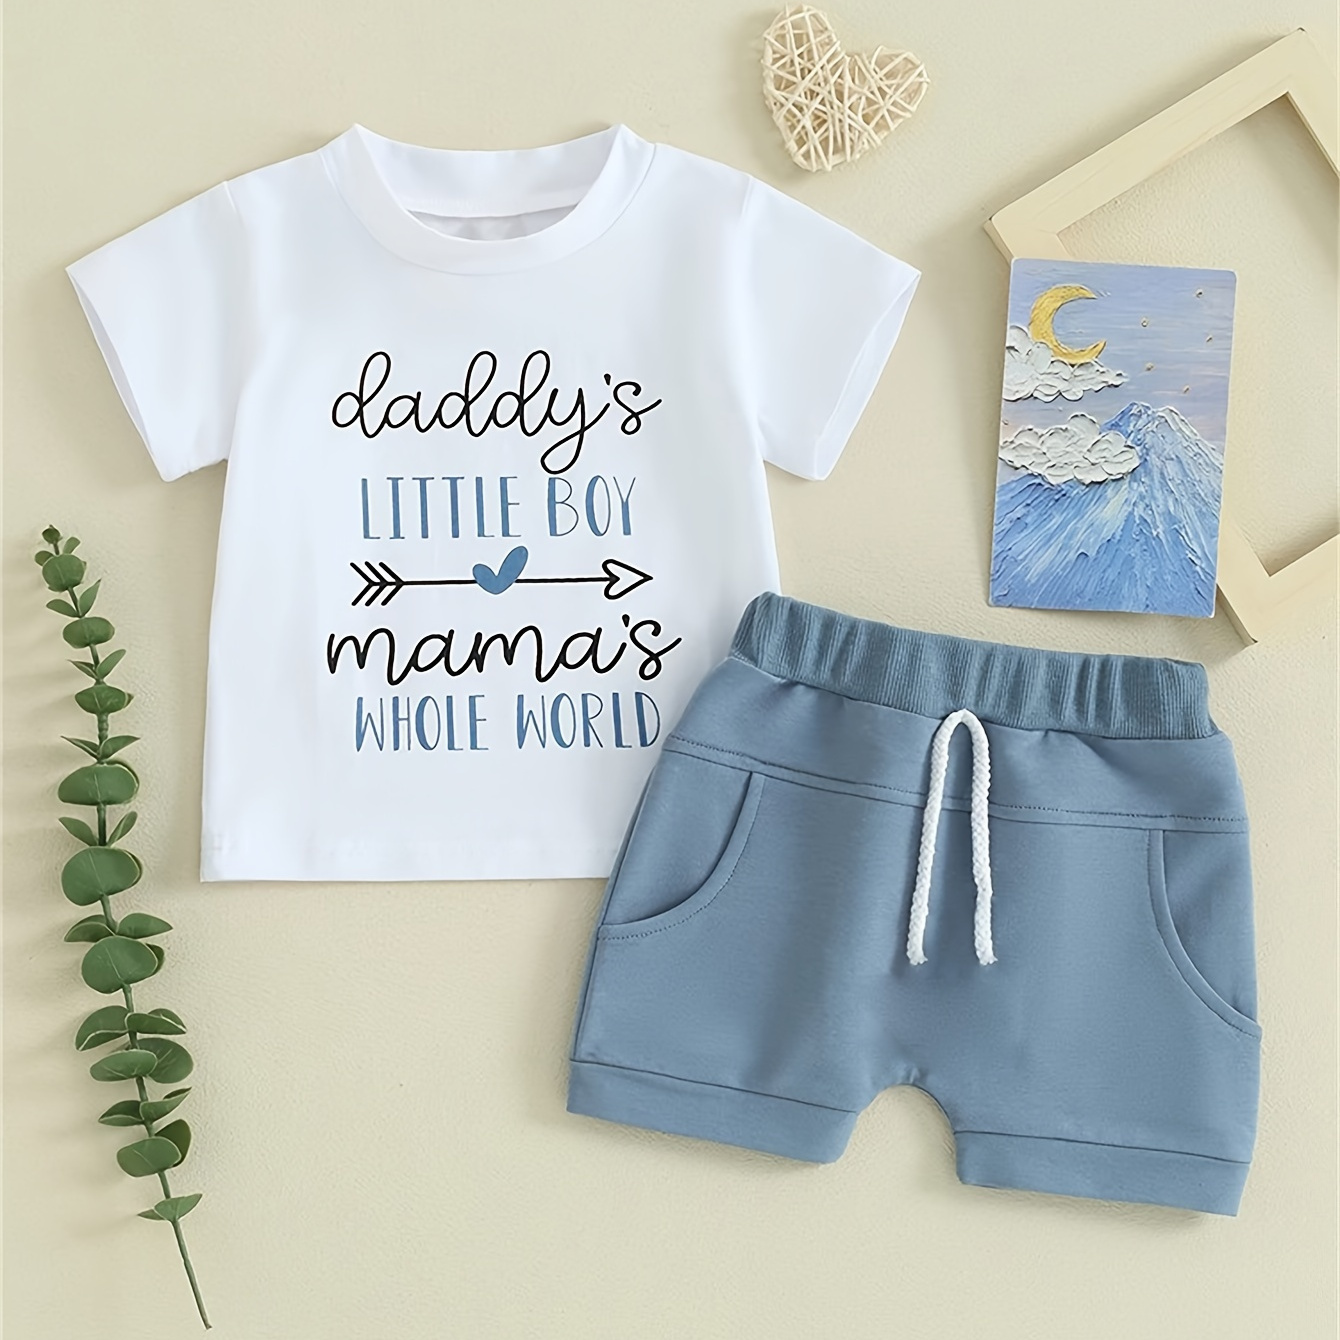 

2pcs Toddler Outfit Set, Casual Short Sleeve Top With "daddy's Little Boy Mama's Whole World" Print & Matching Shorts, Round Neck, Sporty Look For Kids